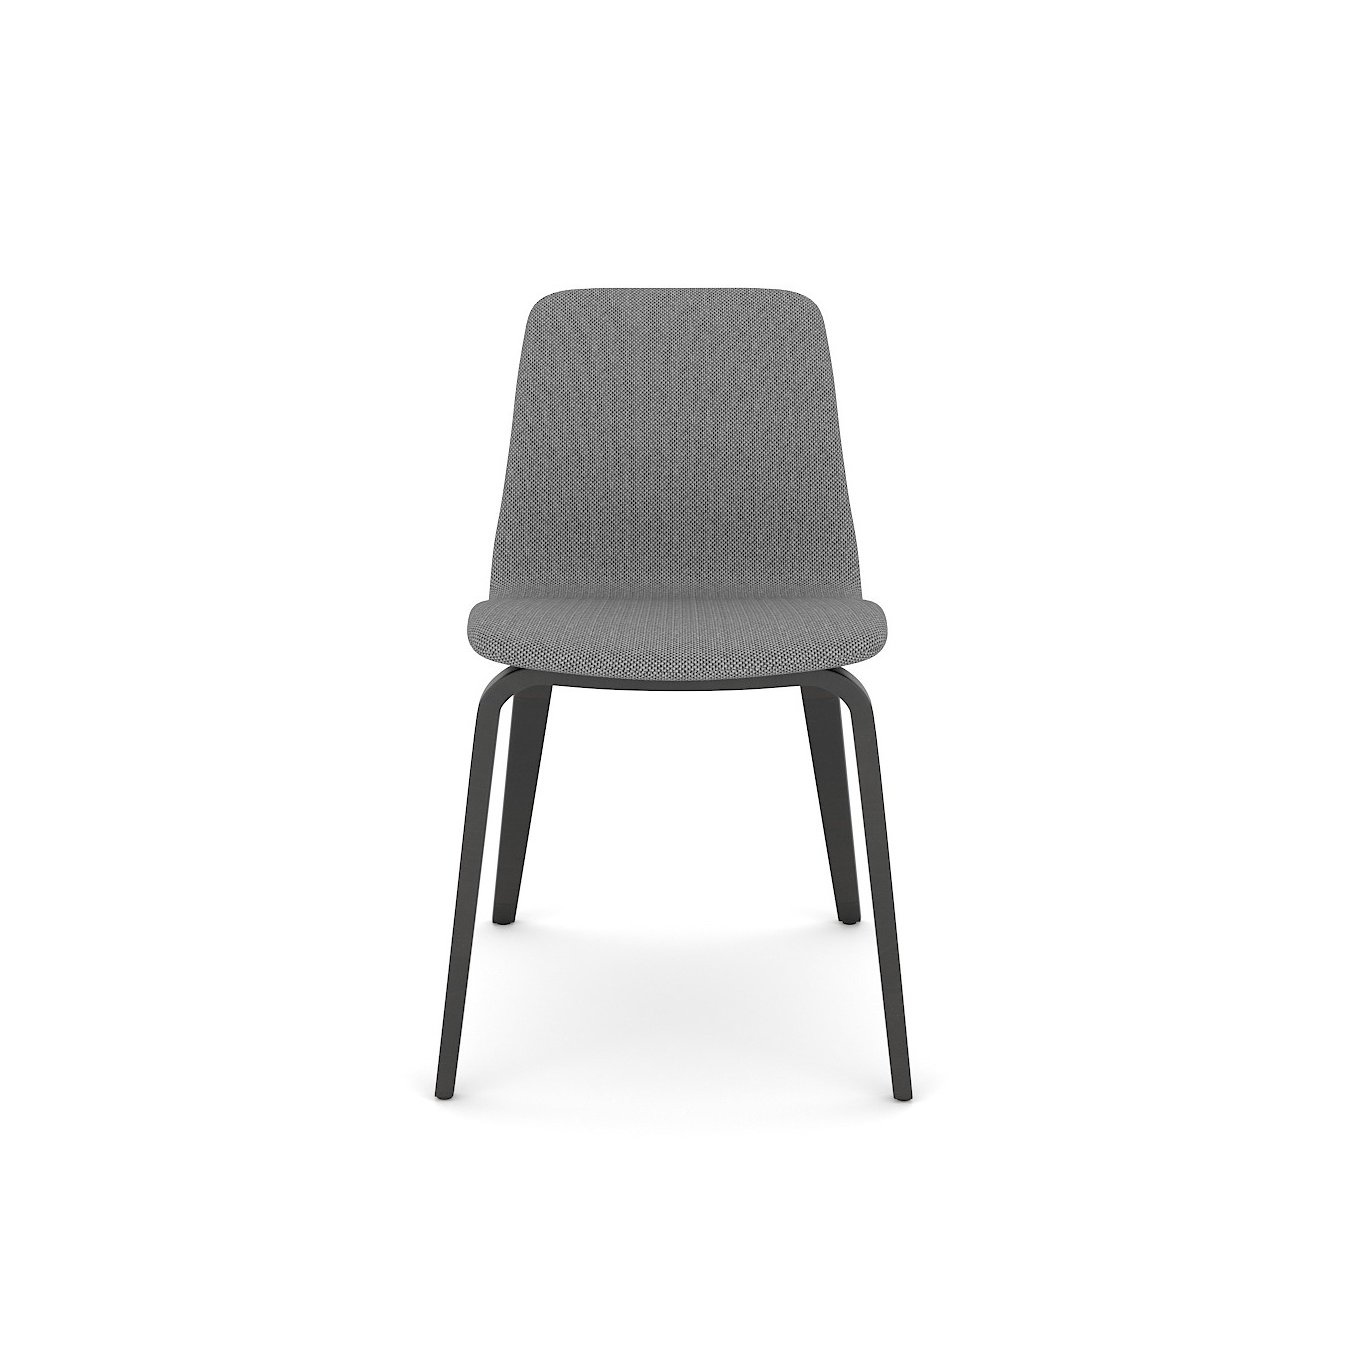 "Hips Dining Chair Upholstered, Grey "